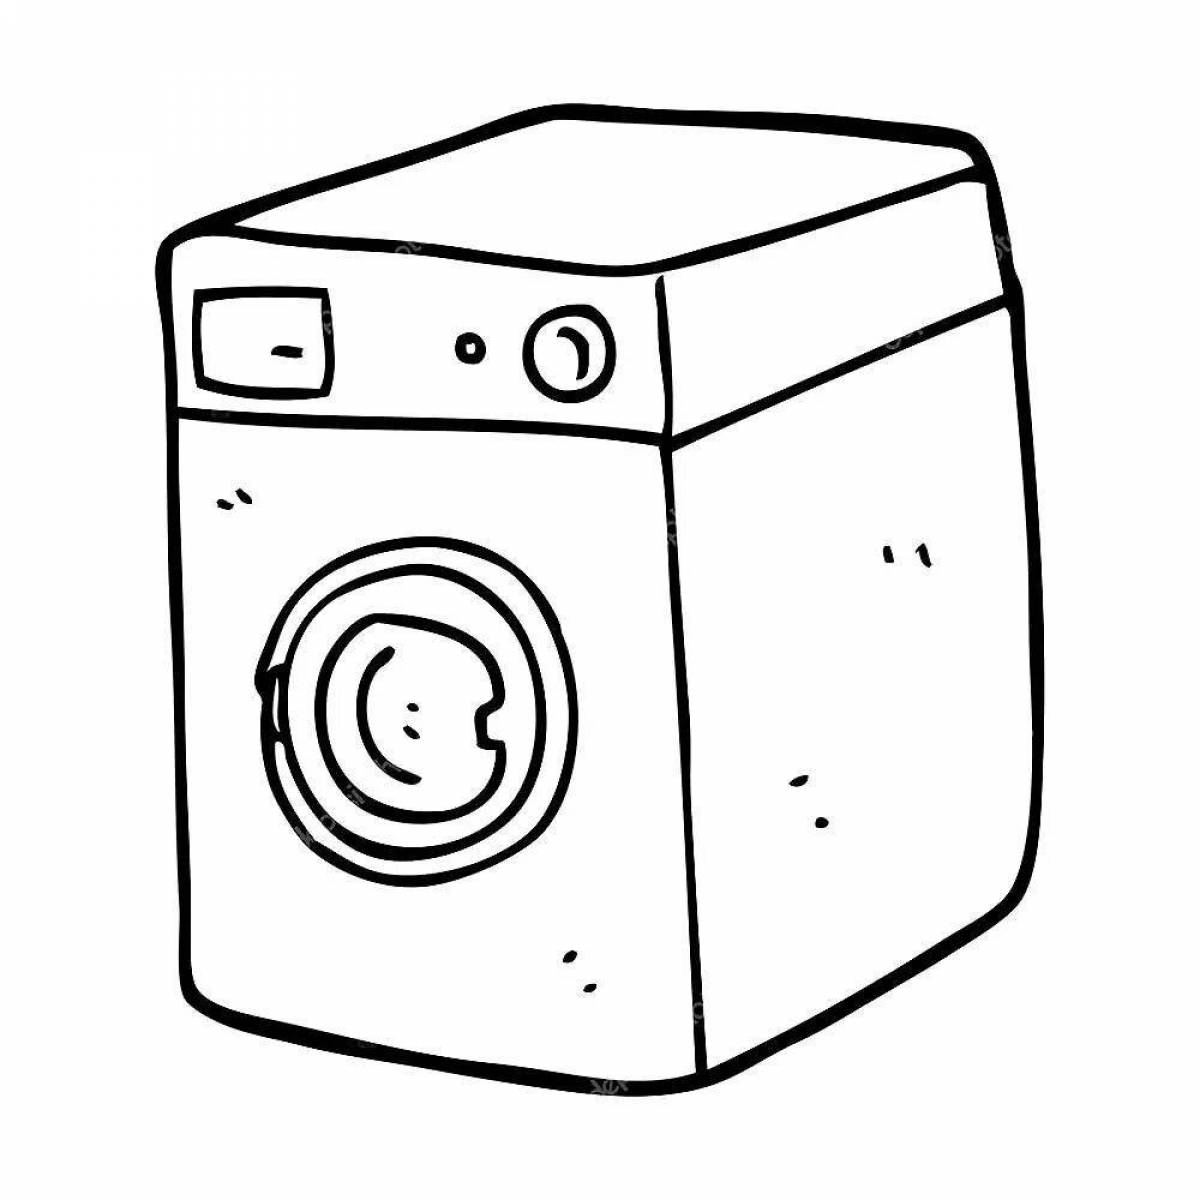 A fun washing machine coloring page for little ones